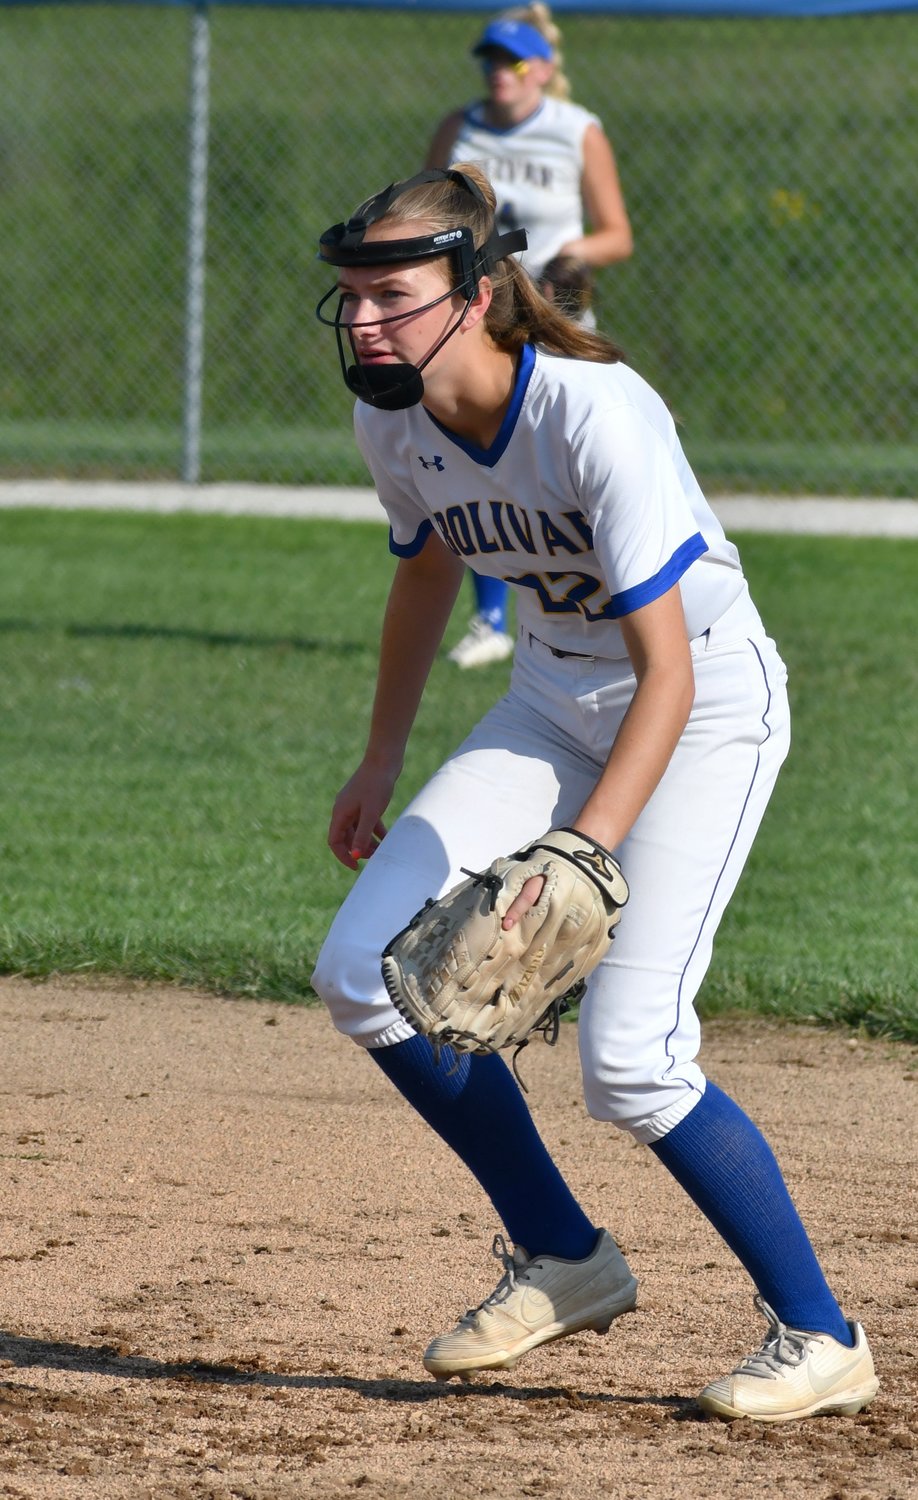 Harper Rowell keeps her eye on the batter to be ready to stop the ball.